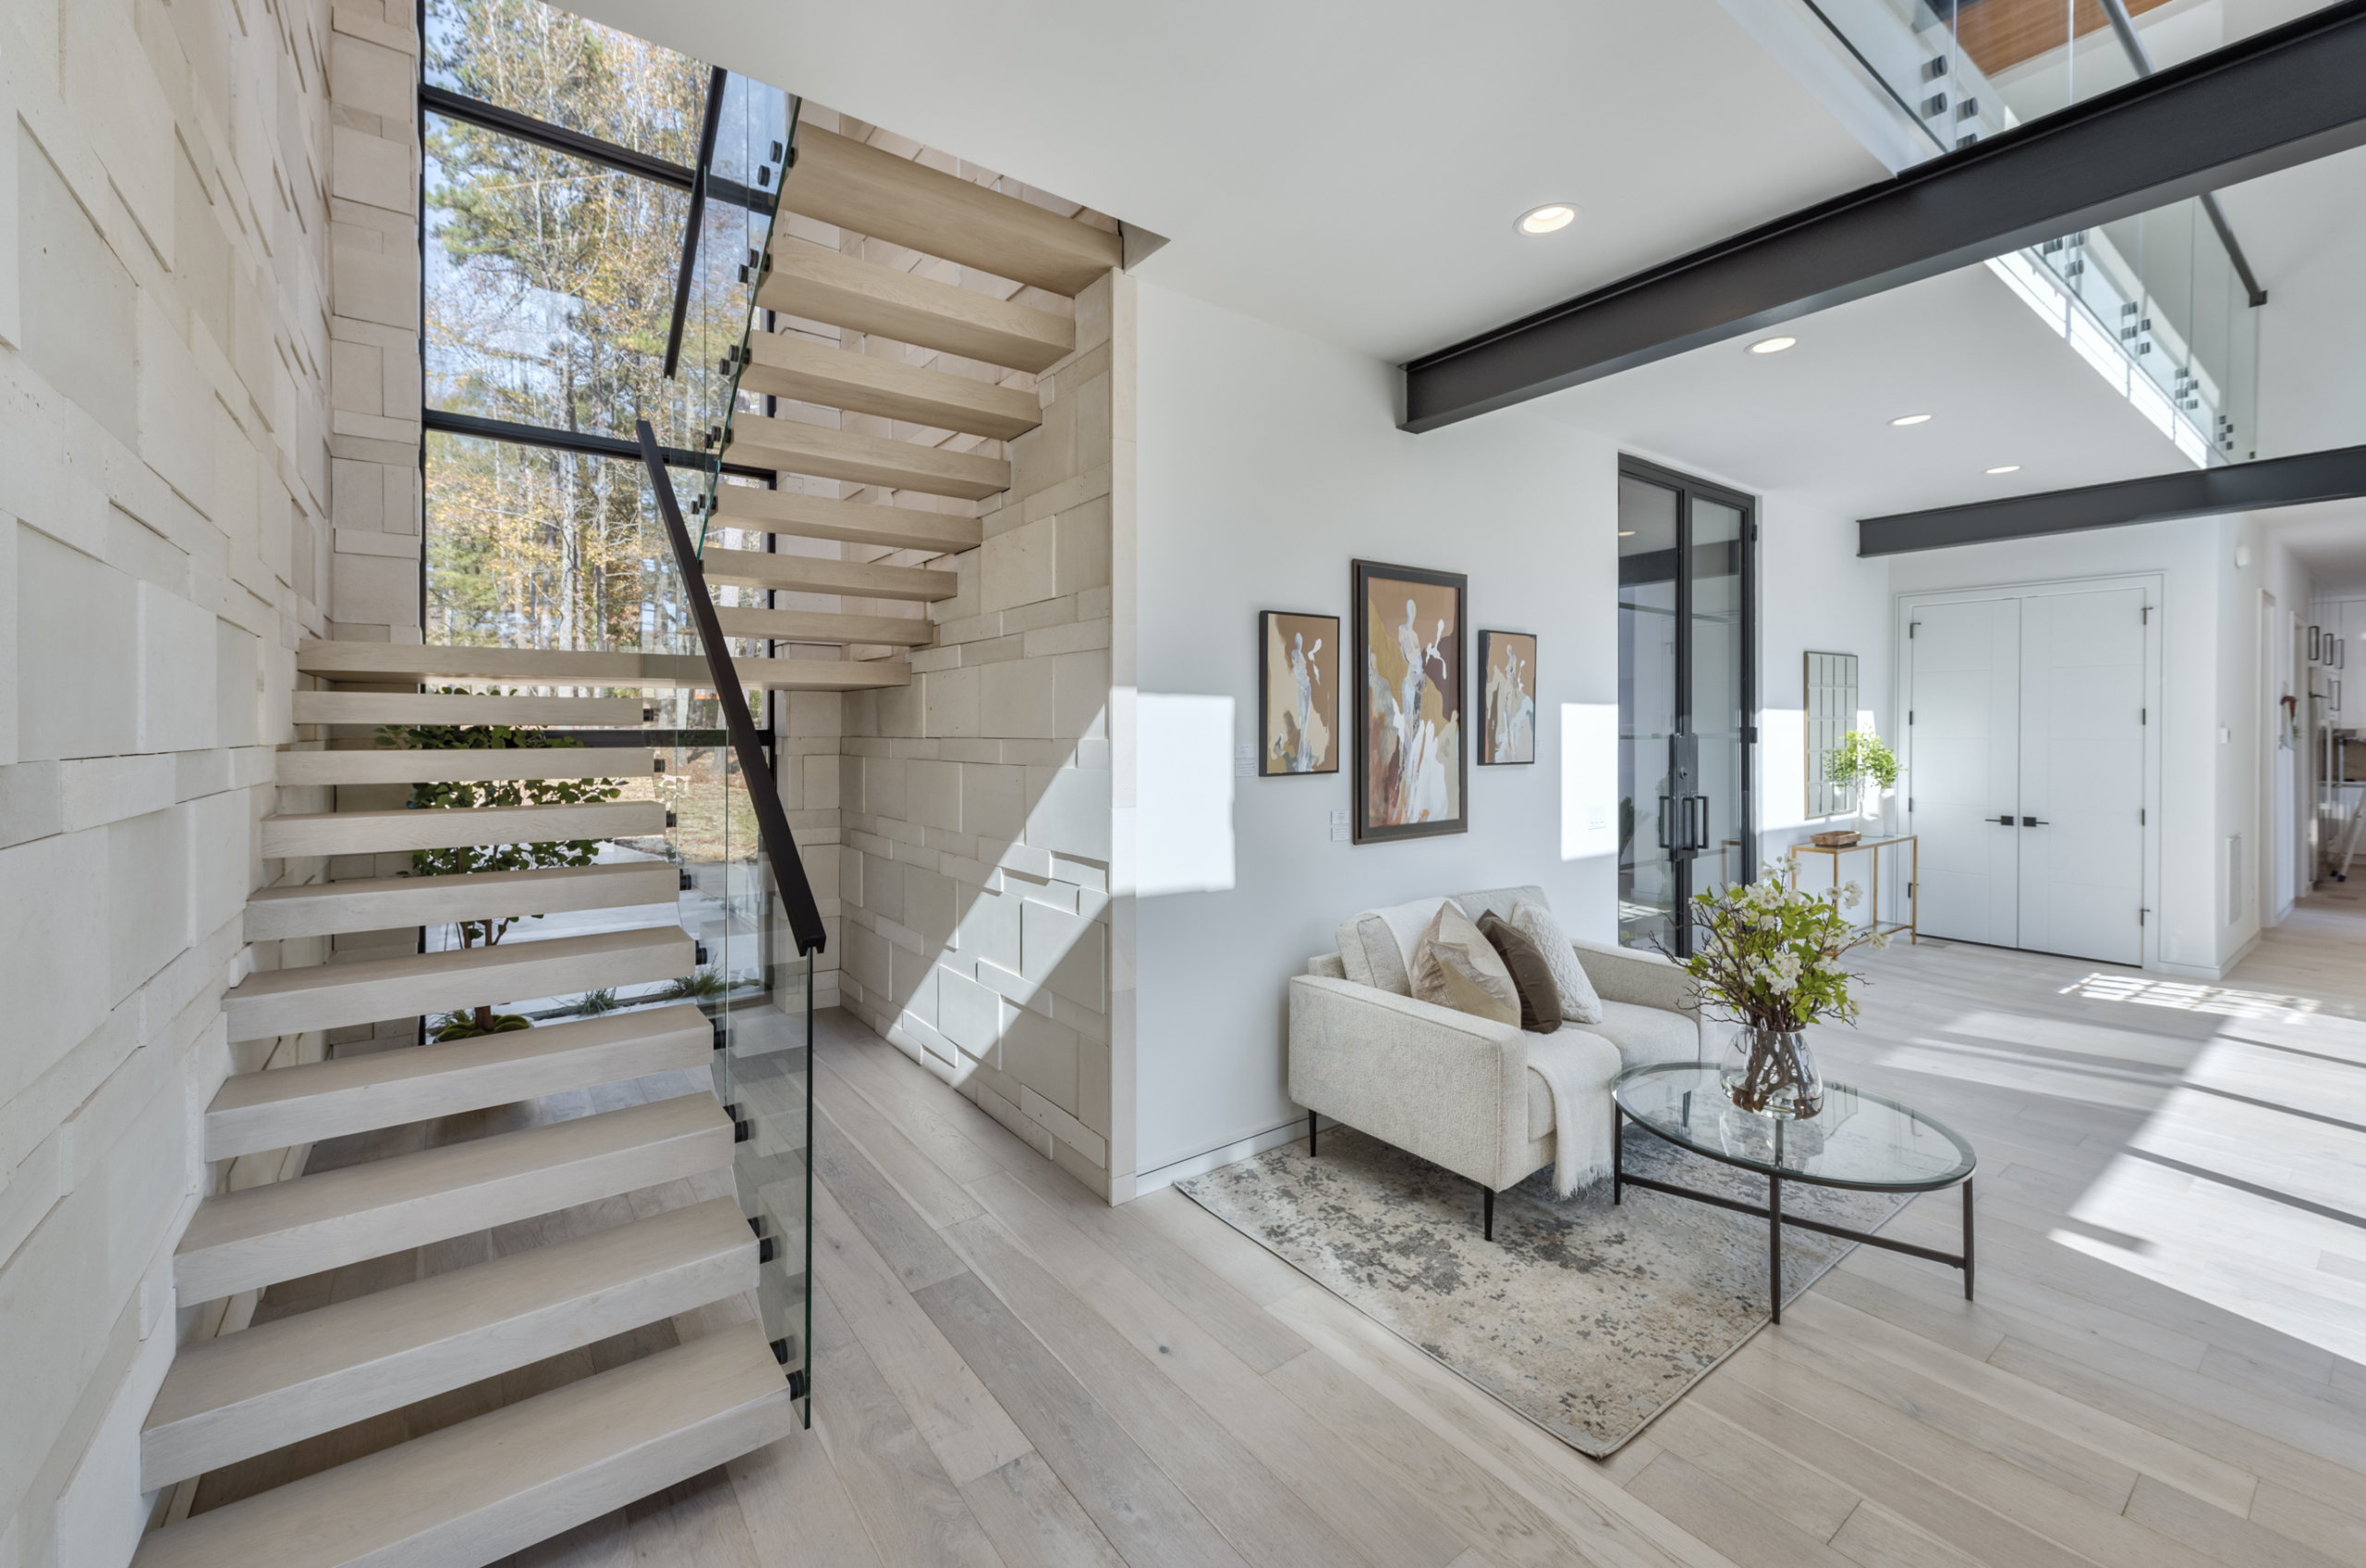 True free floating staircase cantilevered directly out of a palimanan limestone wall with all glass railing and floor to ceiling windows. 6’ wide x 10’ tall wrought iron and glass French front door